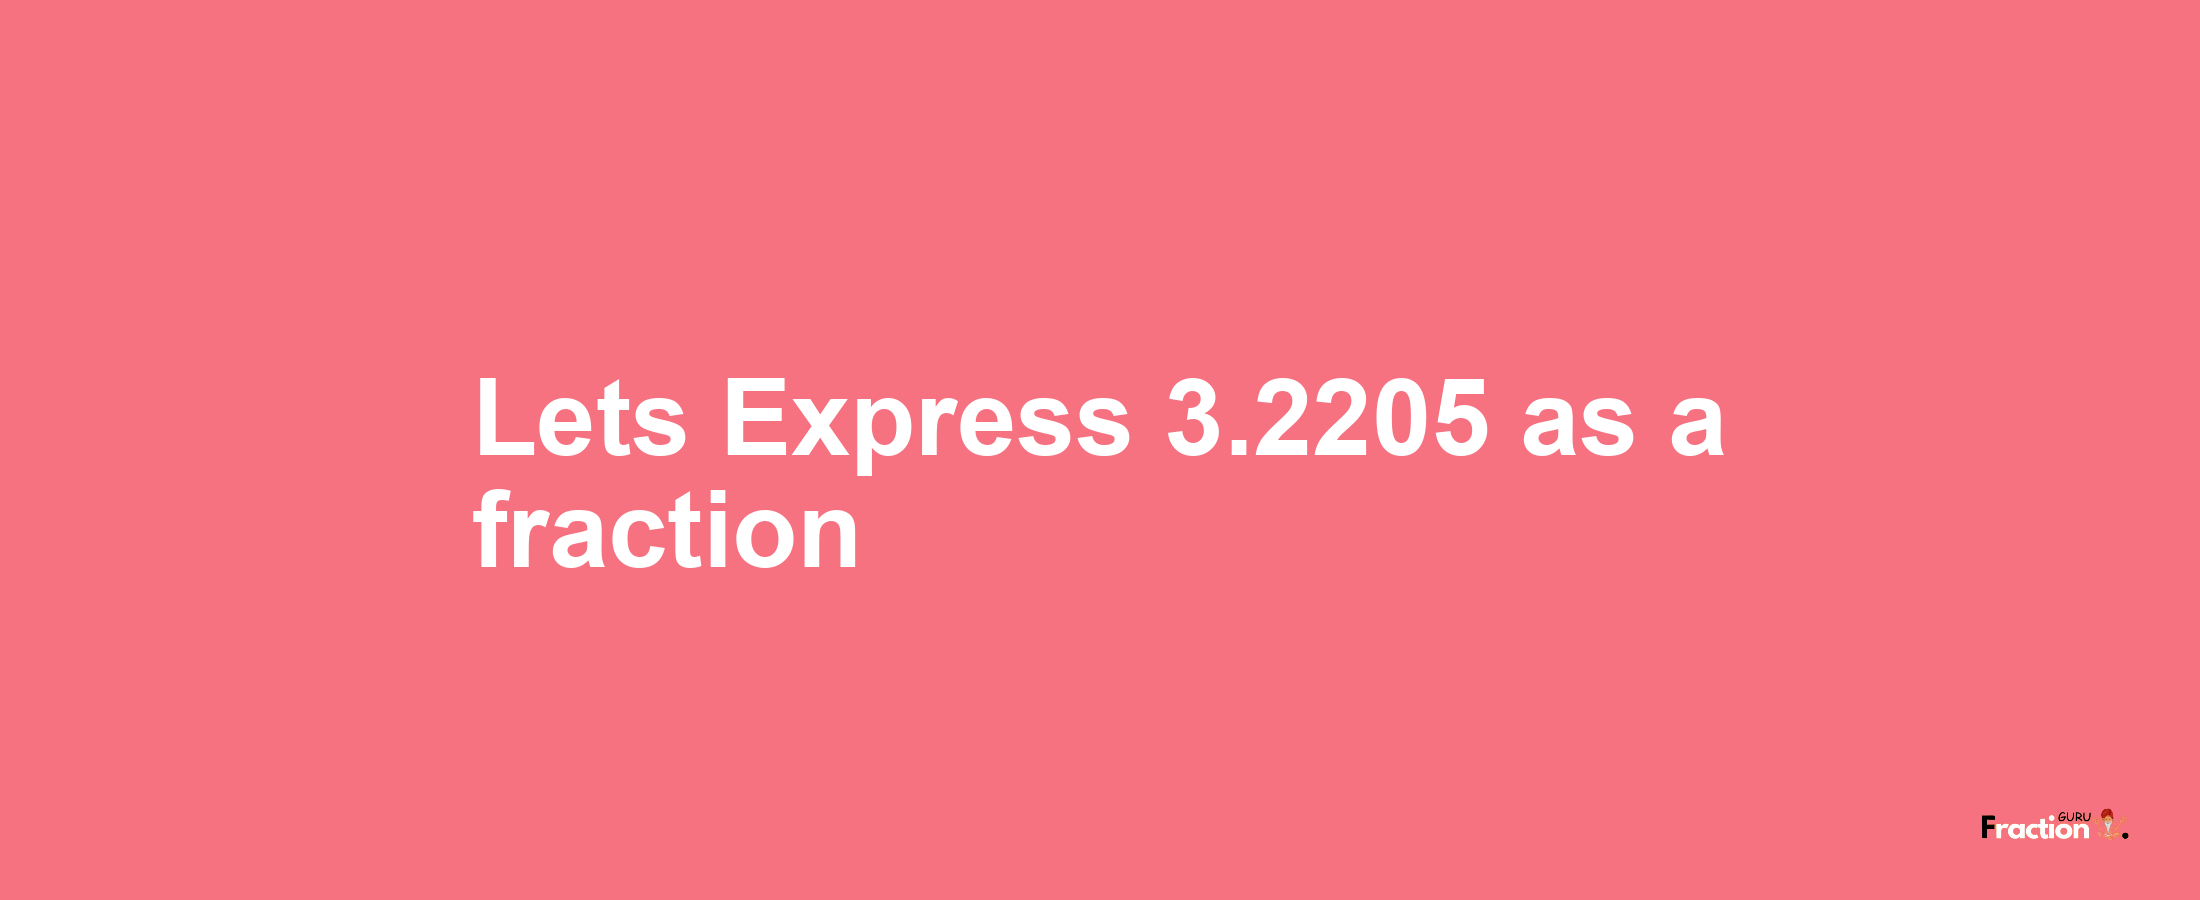 Lets Express 3.2205 as afraction